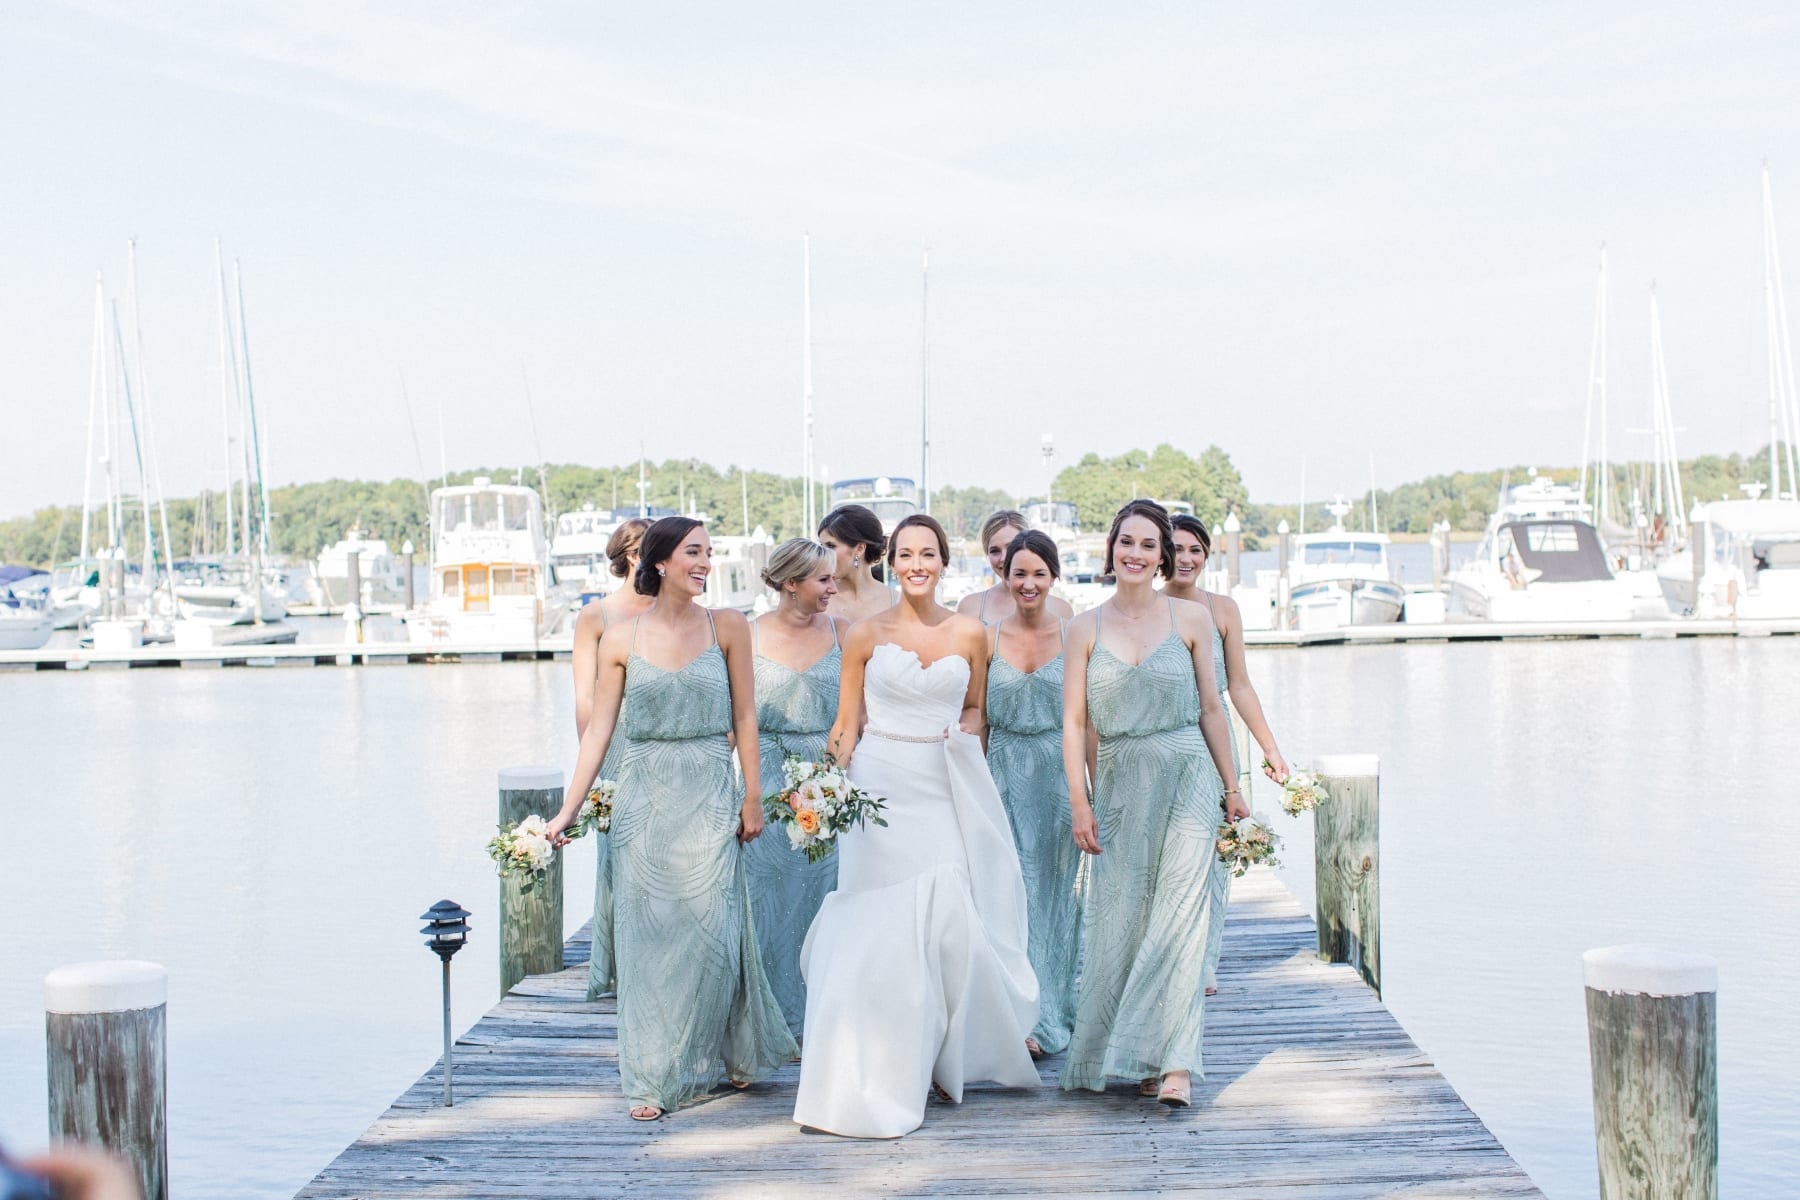 Bride and bridesmaids on dock.